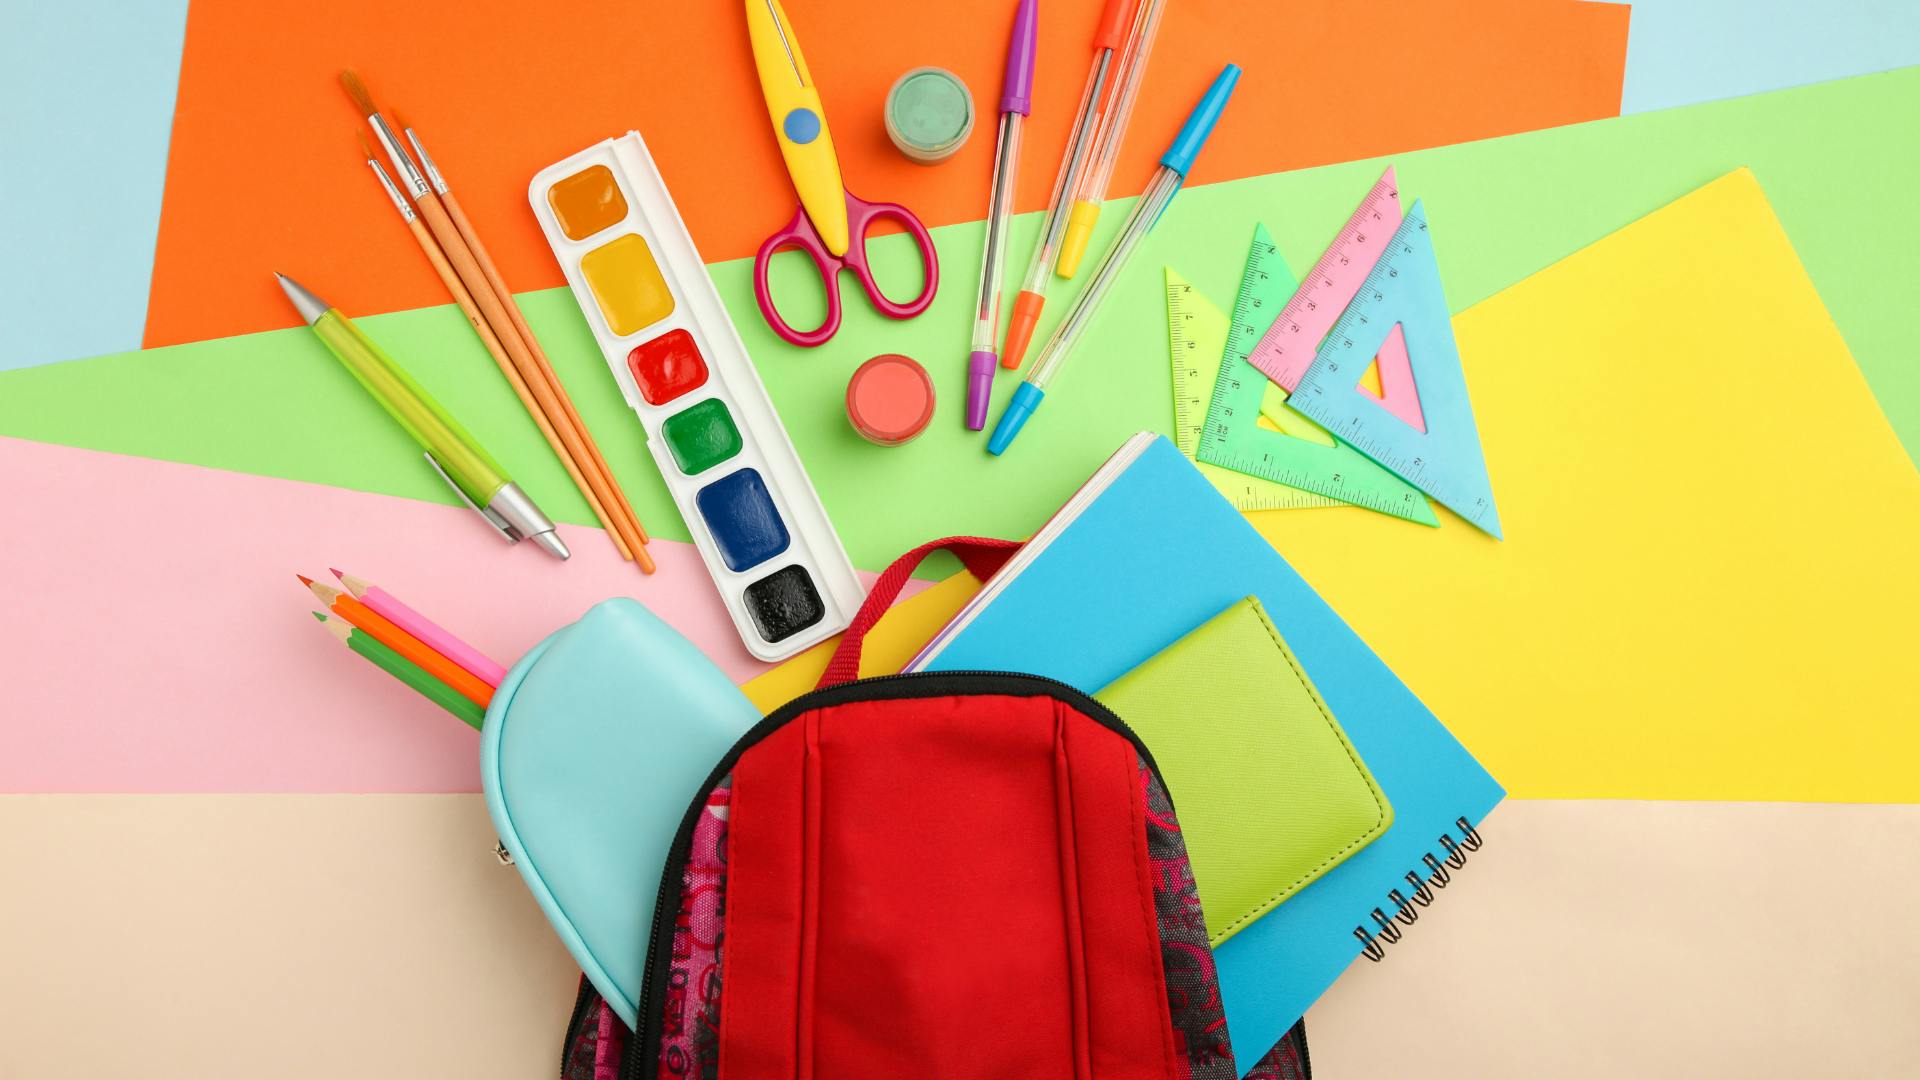 Different type of school supplies on a colorful background.  